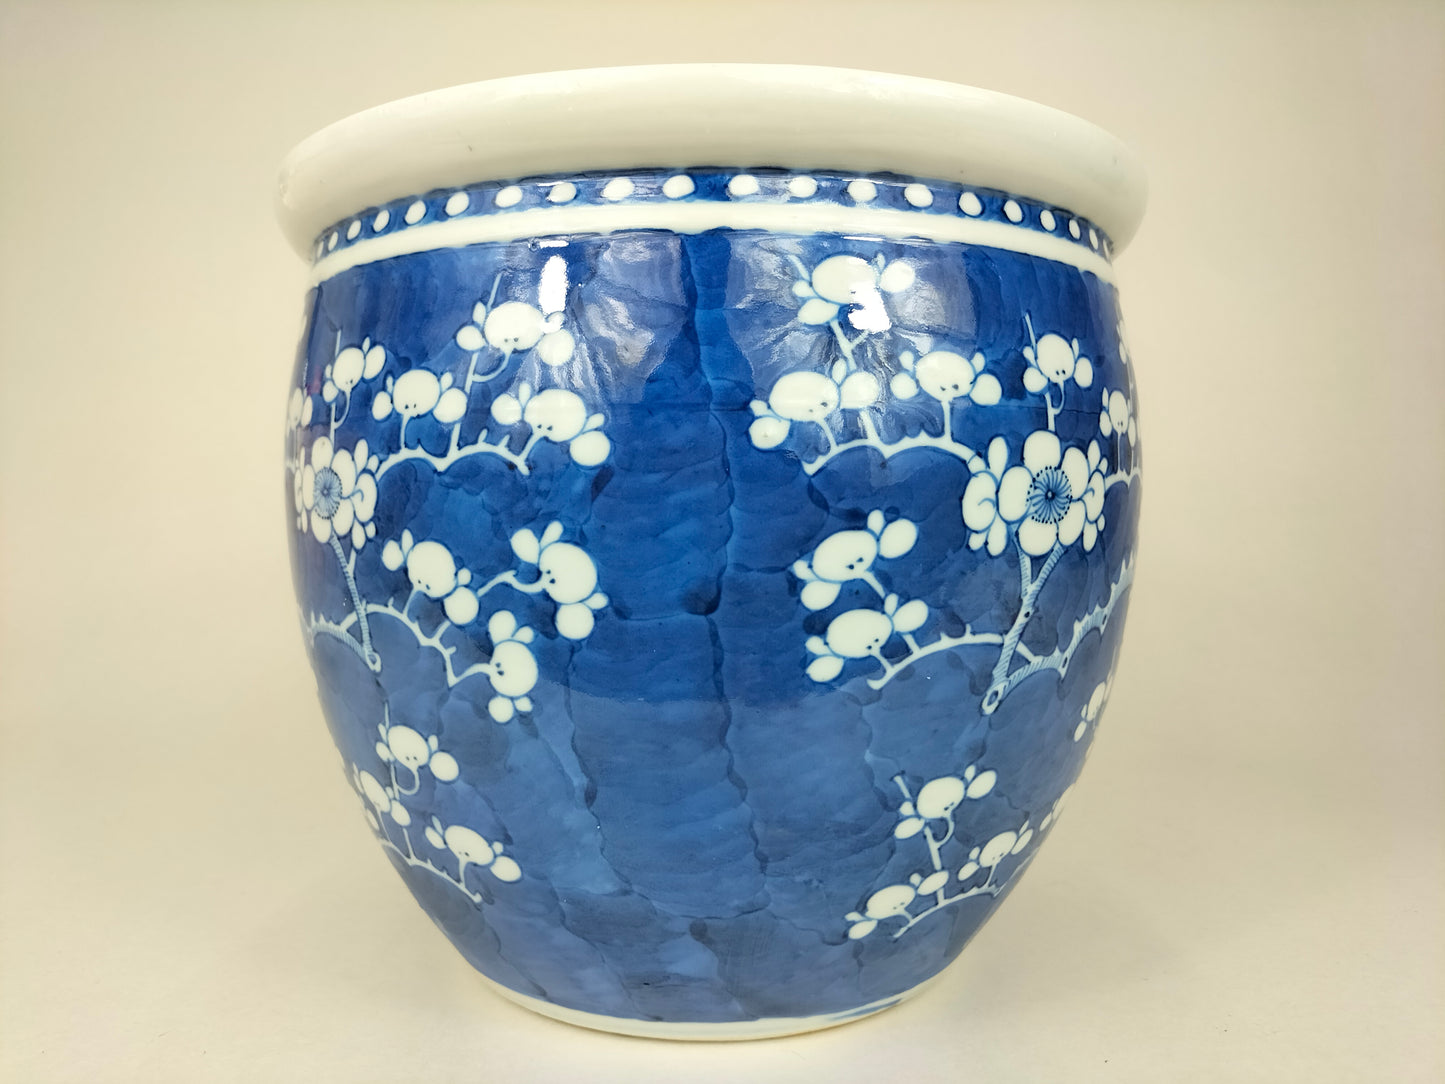 Antique Chinese prunus flower pot // Qing Dynasty - End of the 19th/Early 20th century